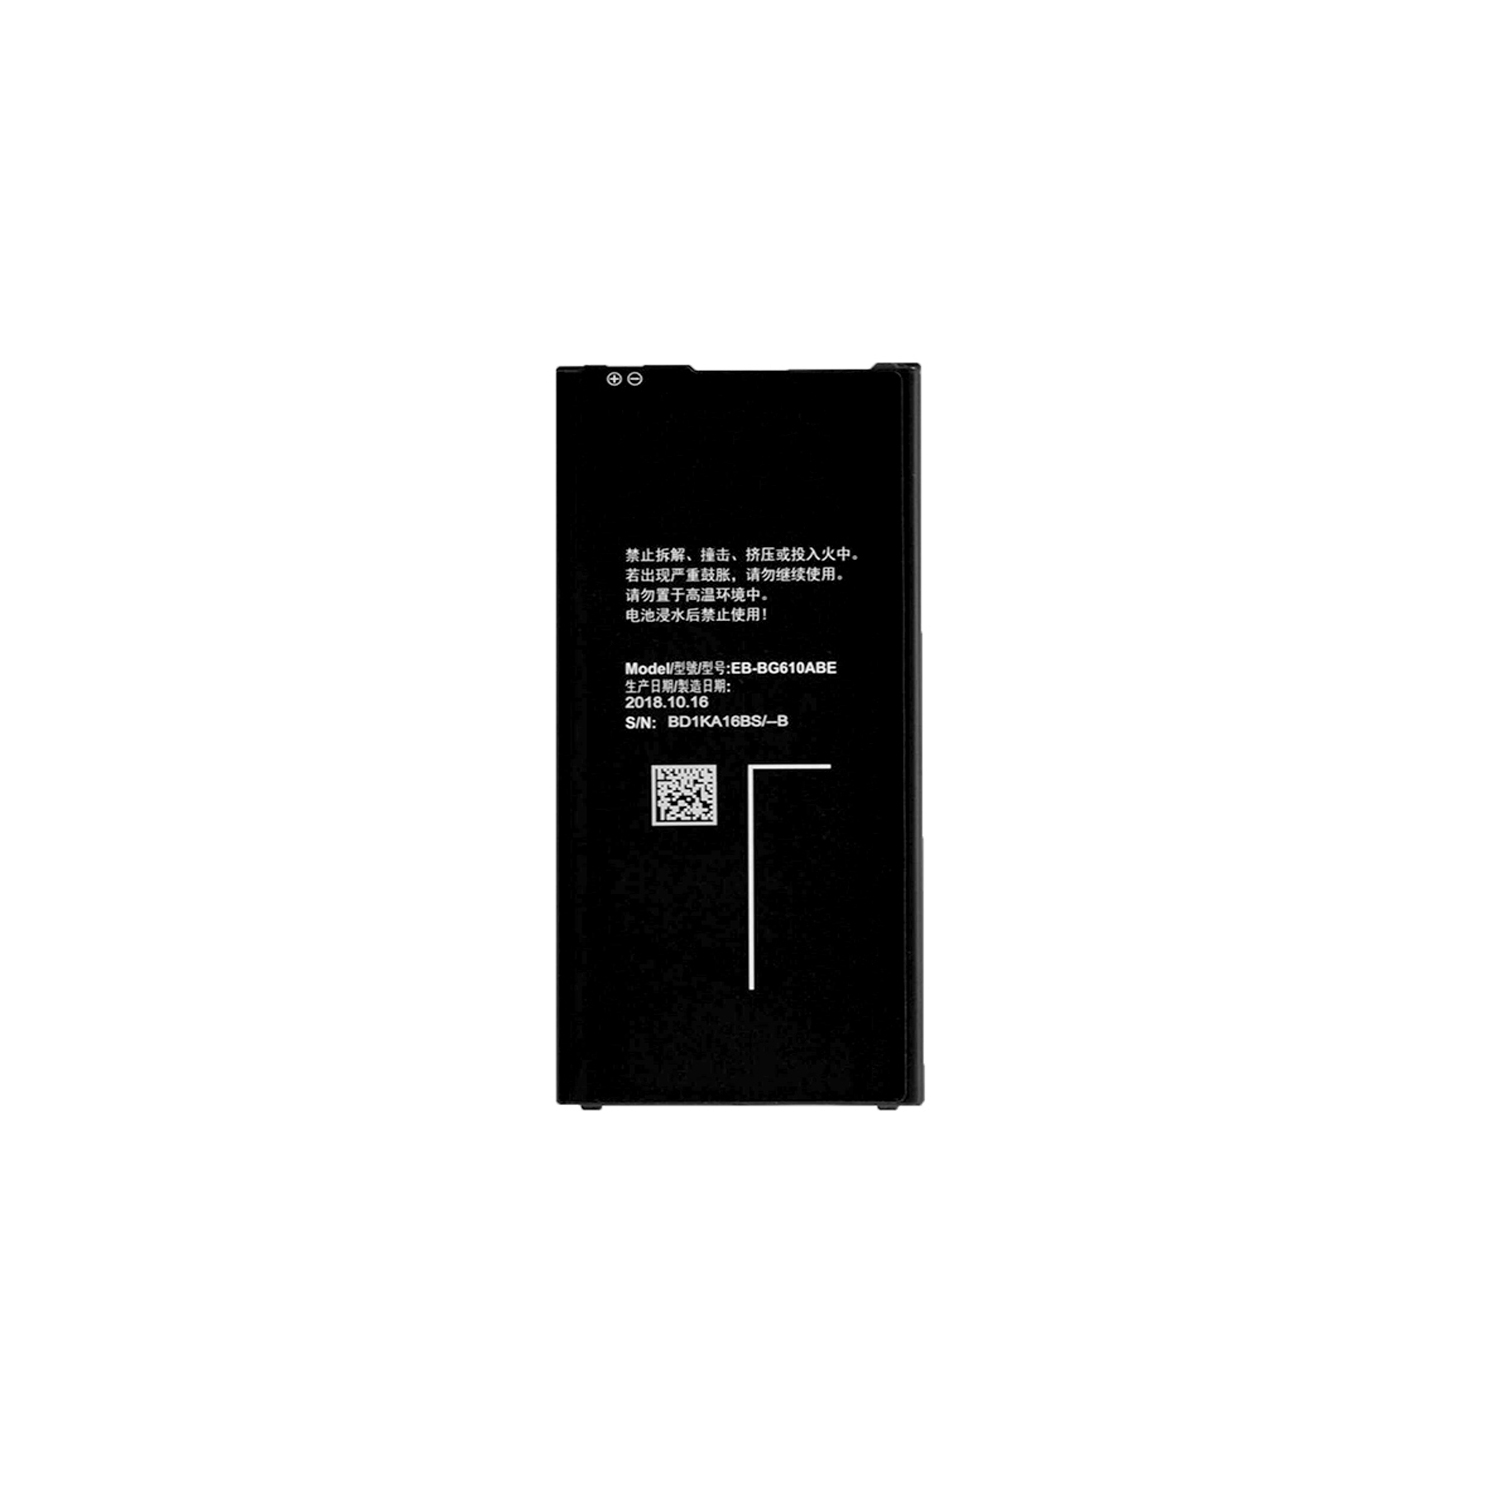 Replacement Battery EB-BG610ABE 3300 mAh For Samsung Galaxy J4+ Plus / Galaxy J6+ Plus / Galaxy J7 / Galaxy J7 Prime